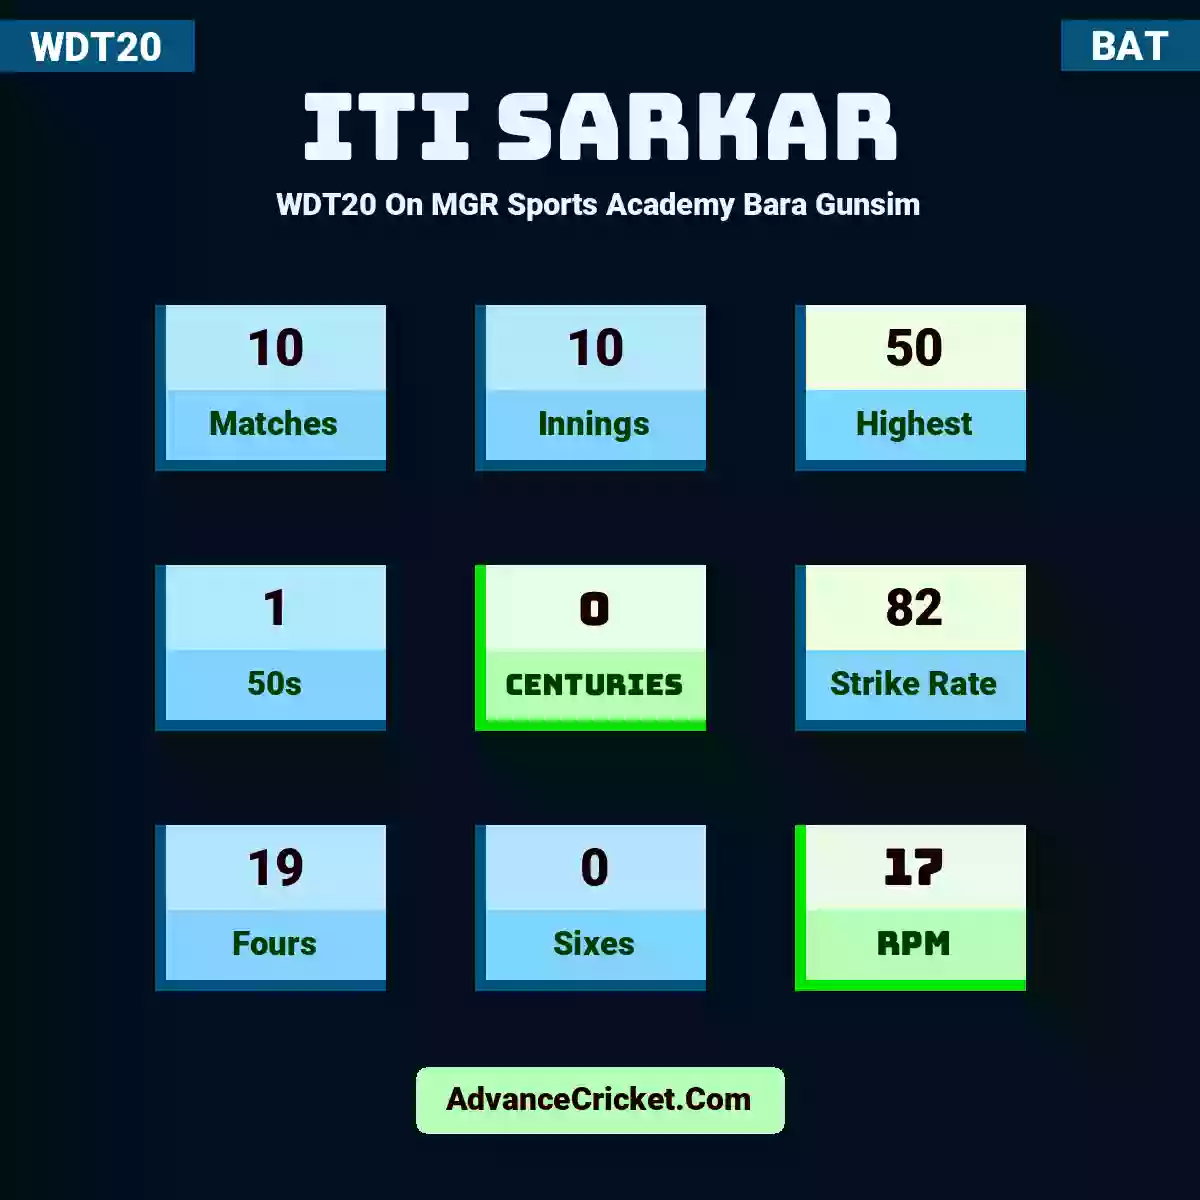 Iti Sarkar WDT20  On MGR Sports Academy Bara Gunsim, Iti Sarkar played 10 matches, scored 50 runs as highest, 1 half-centuries, and 0 centuries, with a strike rate of 82. I.Sarkar hit 19 fours and 0 sixes, with an RPM of 17.